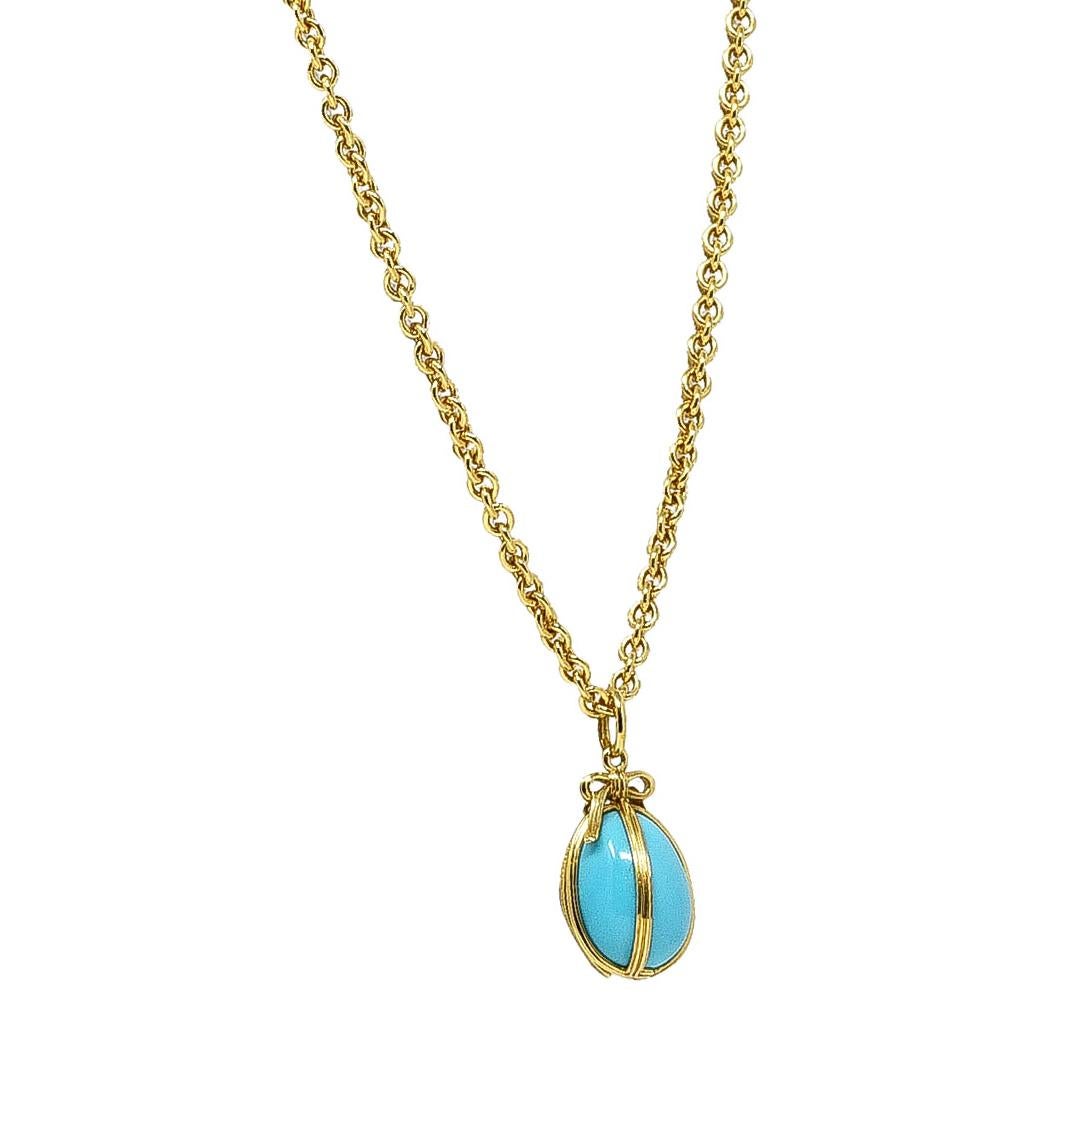 Contemporary Jean Schlumberger 1970 Tiffany & Co. Turquoise 18 Karat Yellow Gold Egg Necklace